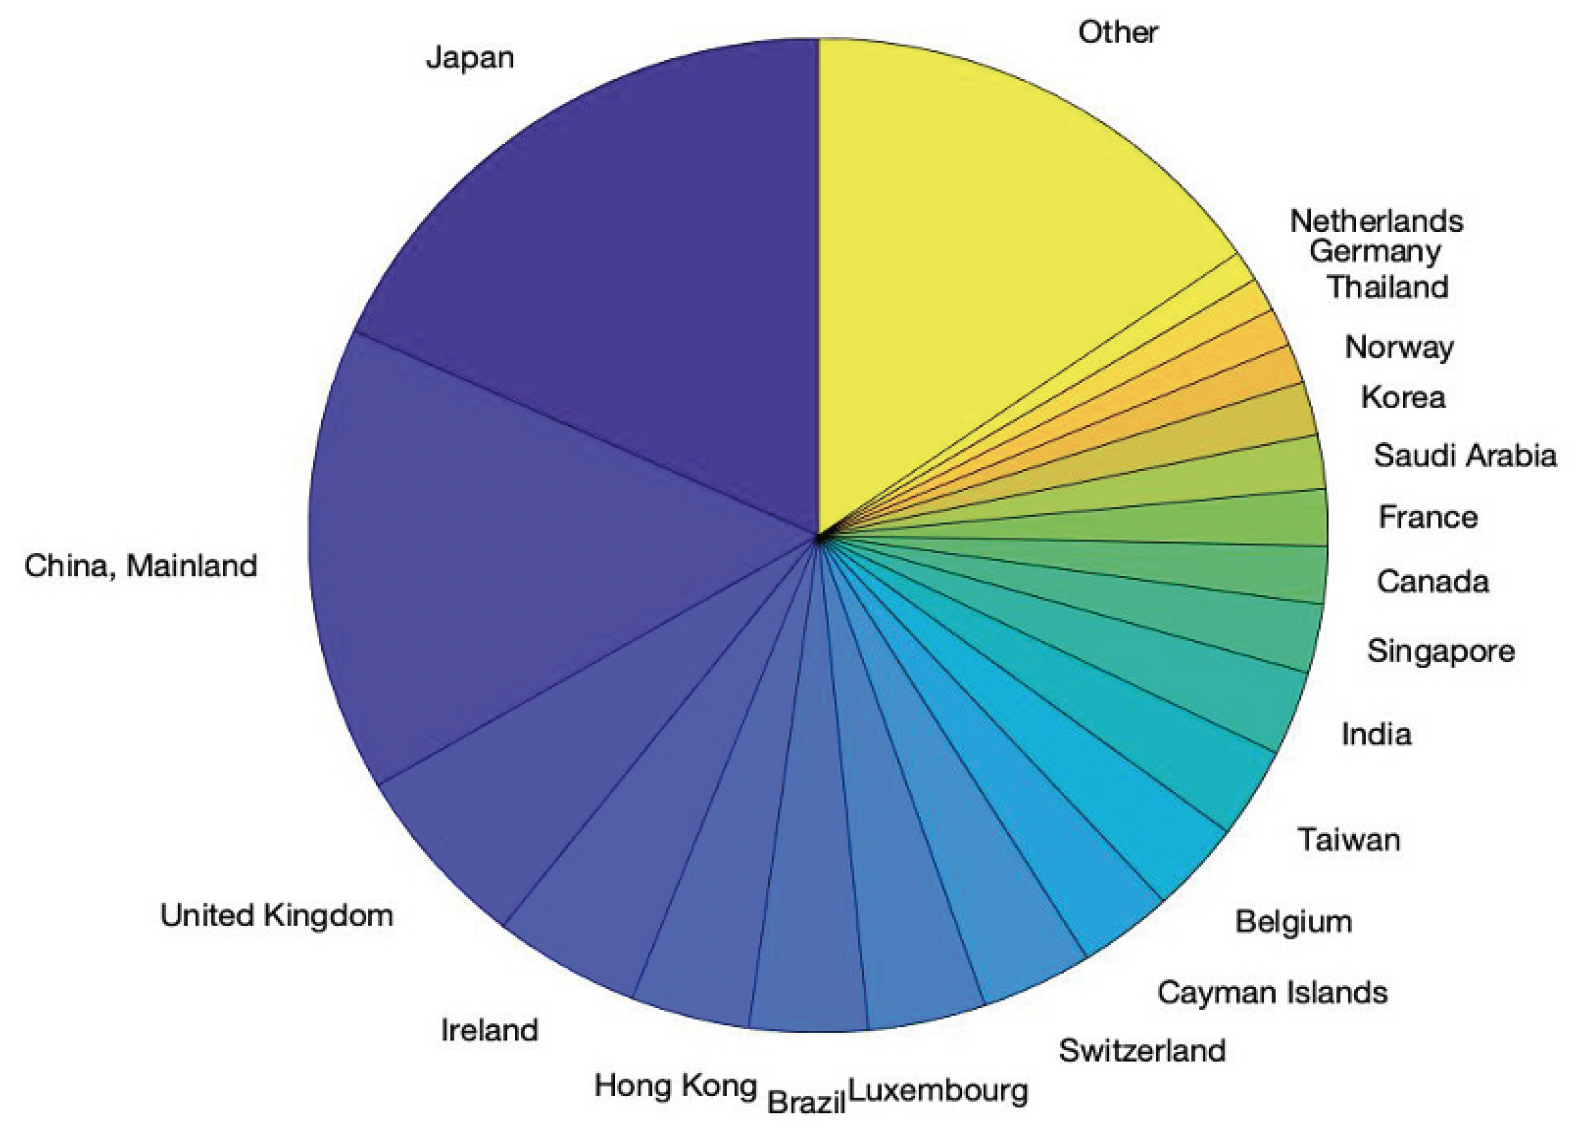 This pie chart compares foreign U.S. debt holdings.